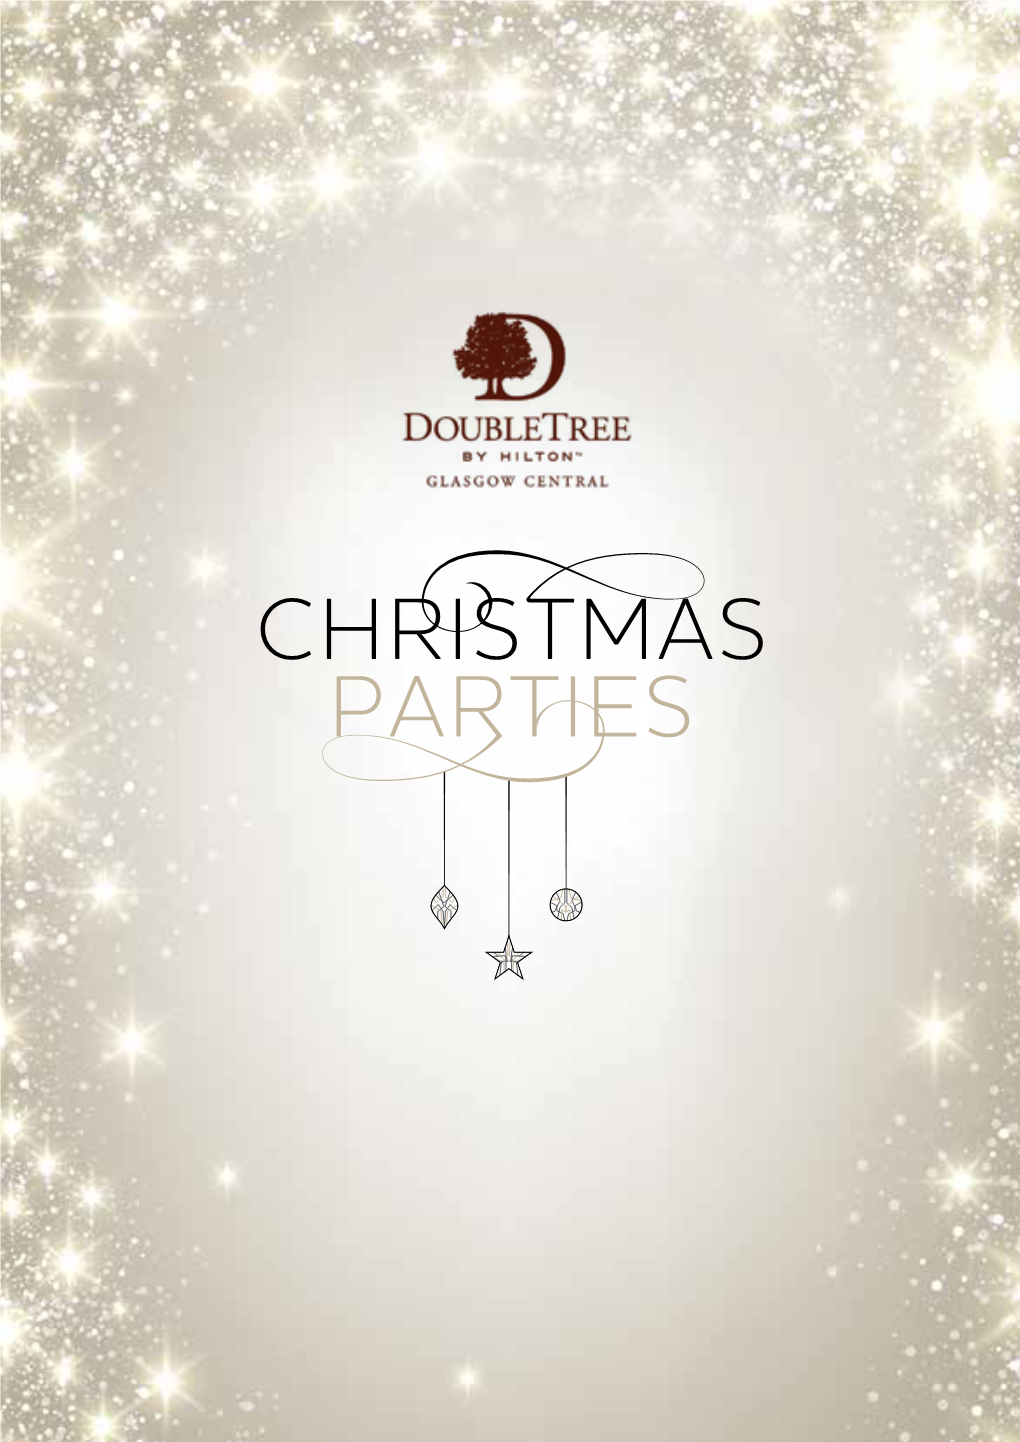 Disco Party Nights Doubletree by Hilton Glasgow Central Doubletree by Hilton Glasgow Central